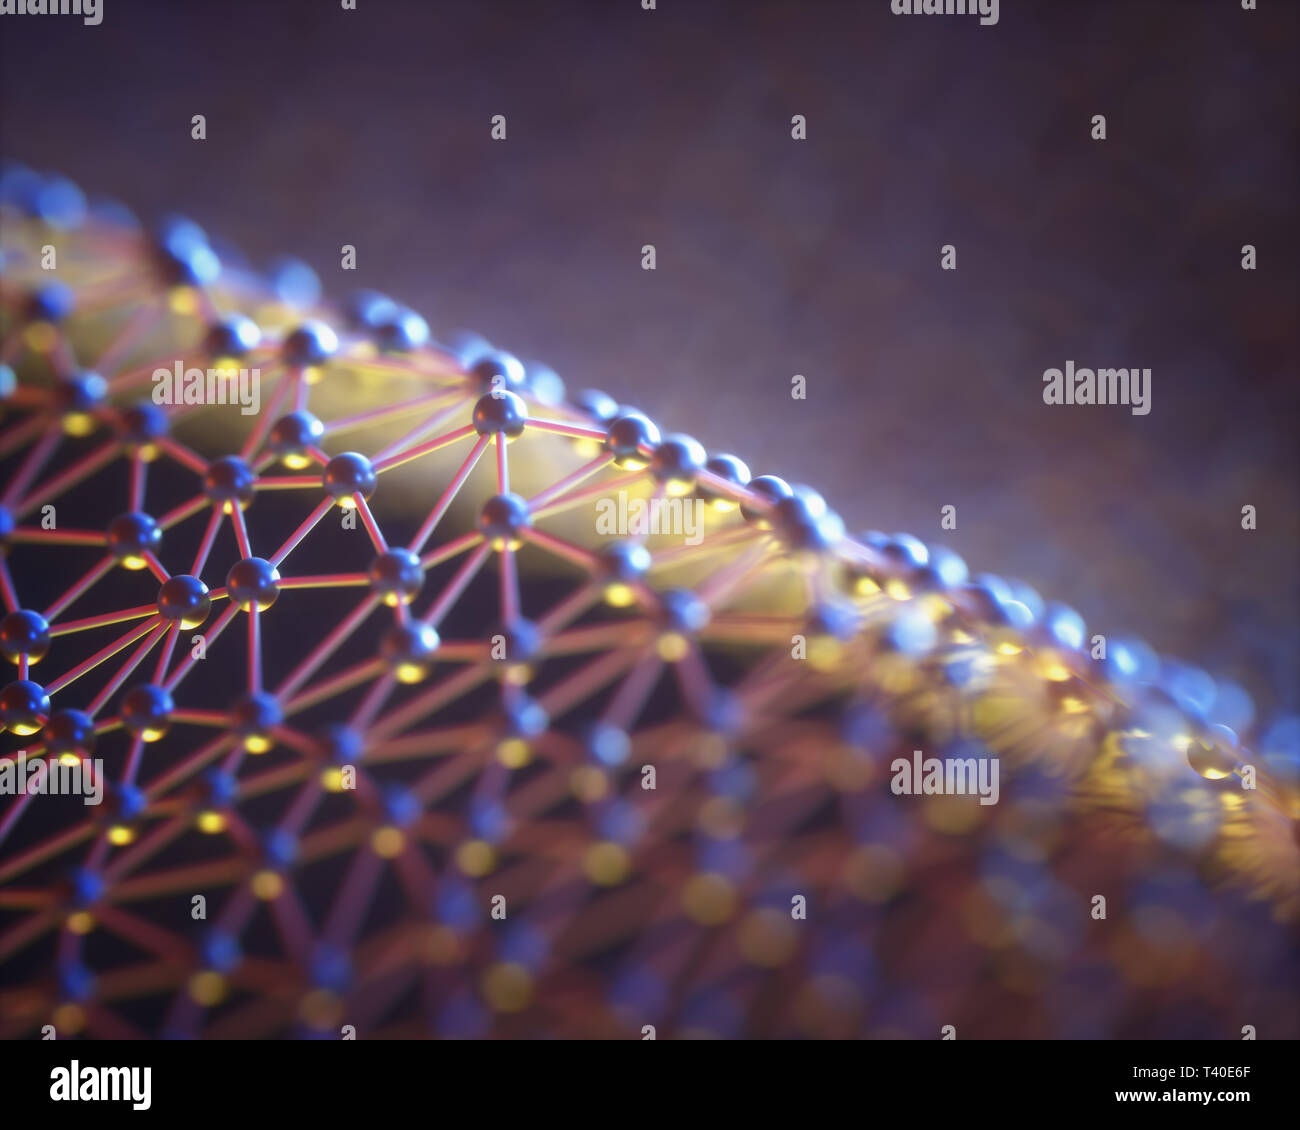 Concept image of an organic cell structure. Structure in lines and nodes representing molecular connections. Stock Photo